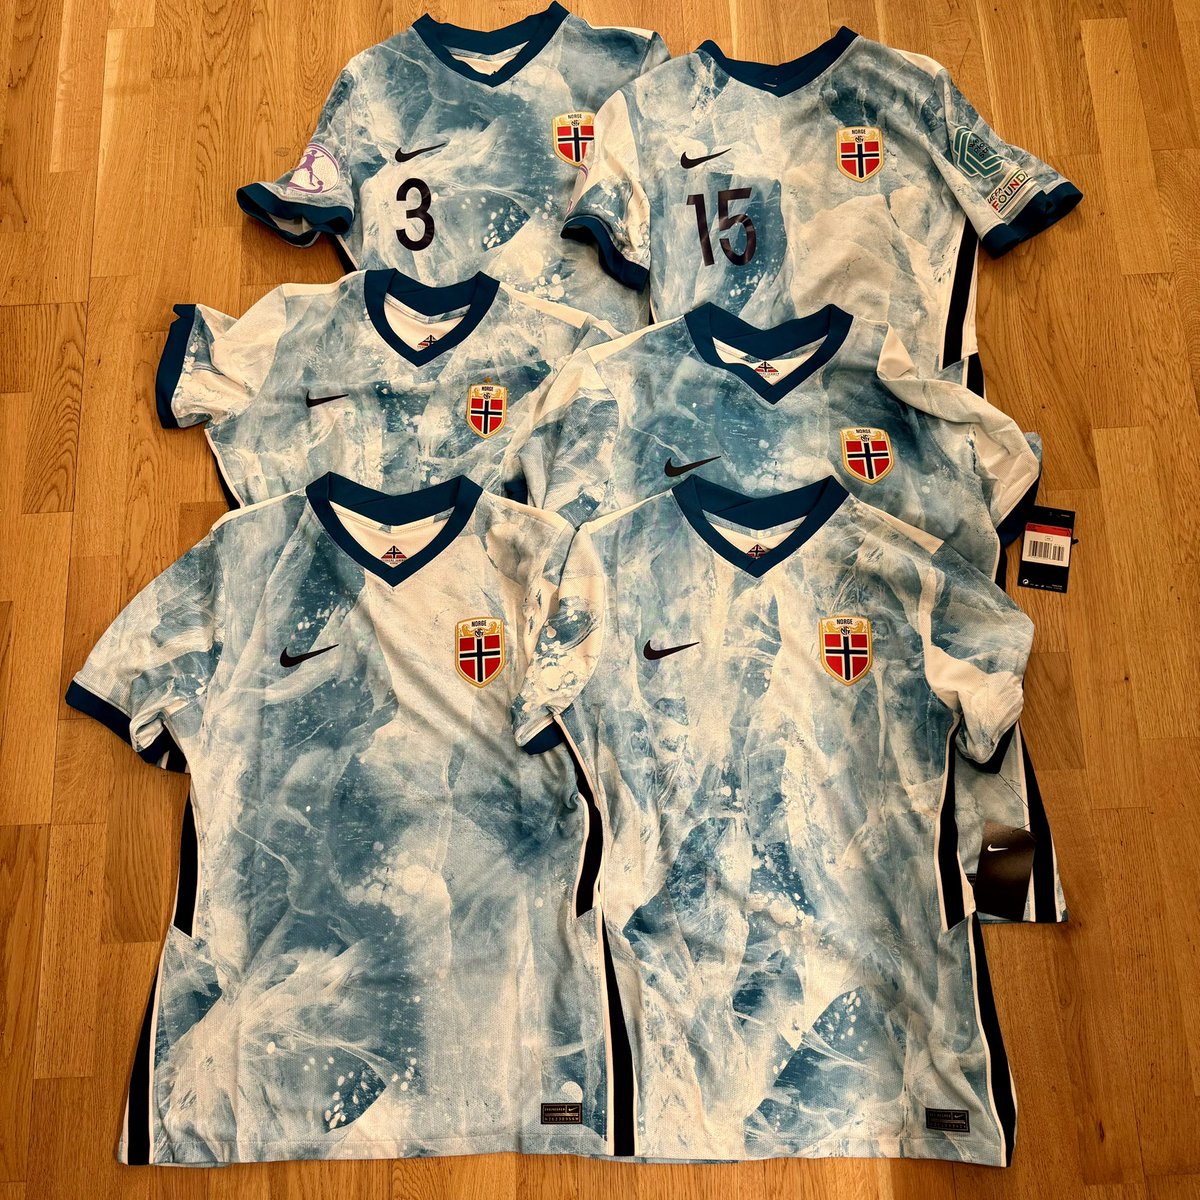 Women’s U19 matchworn medium - £85 Women’s BNWT medium - £100 Men’s BNWT Large & Medium - £200 Prices include shipping from Norway to UK/Europe DM for more info and pictures and to buy